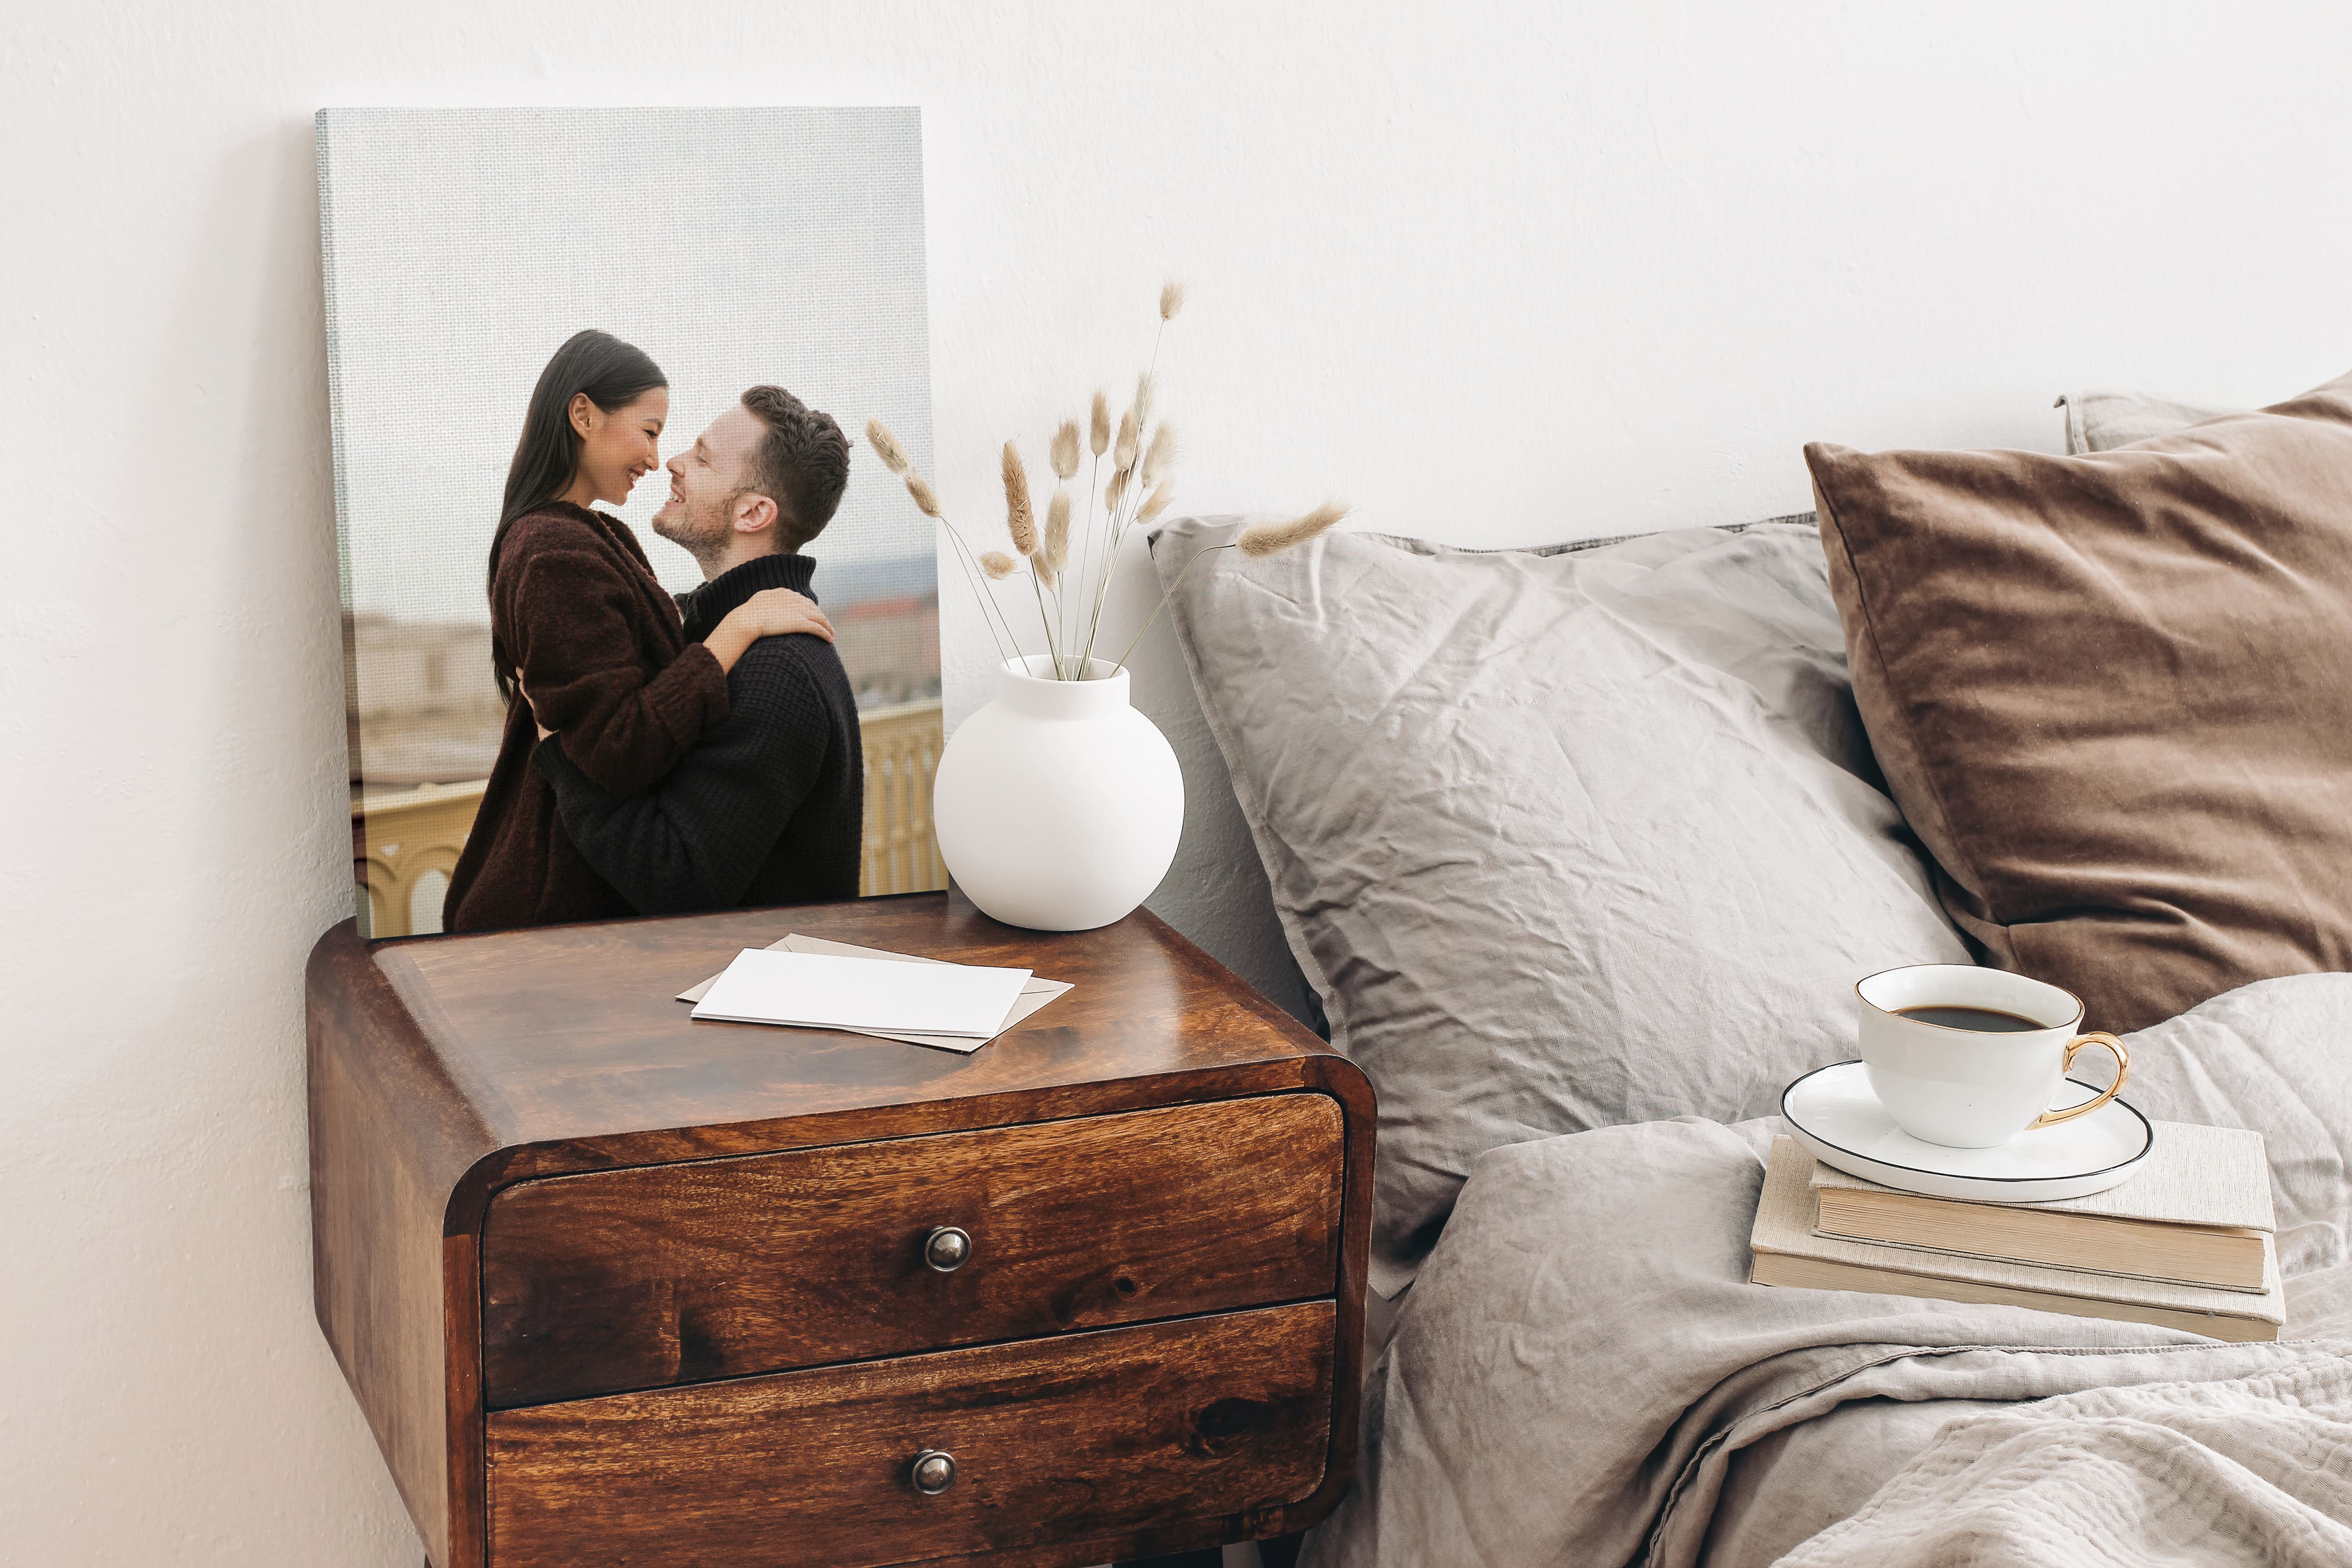 Canvas print on bedside table of couple.